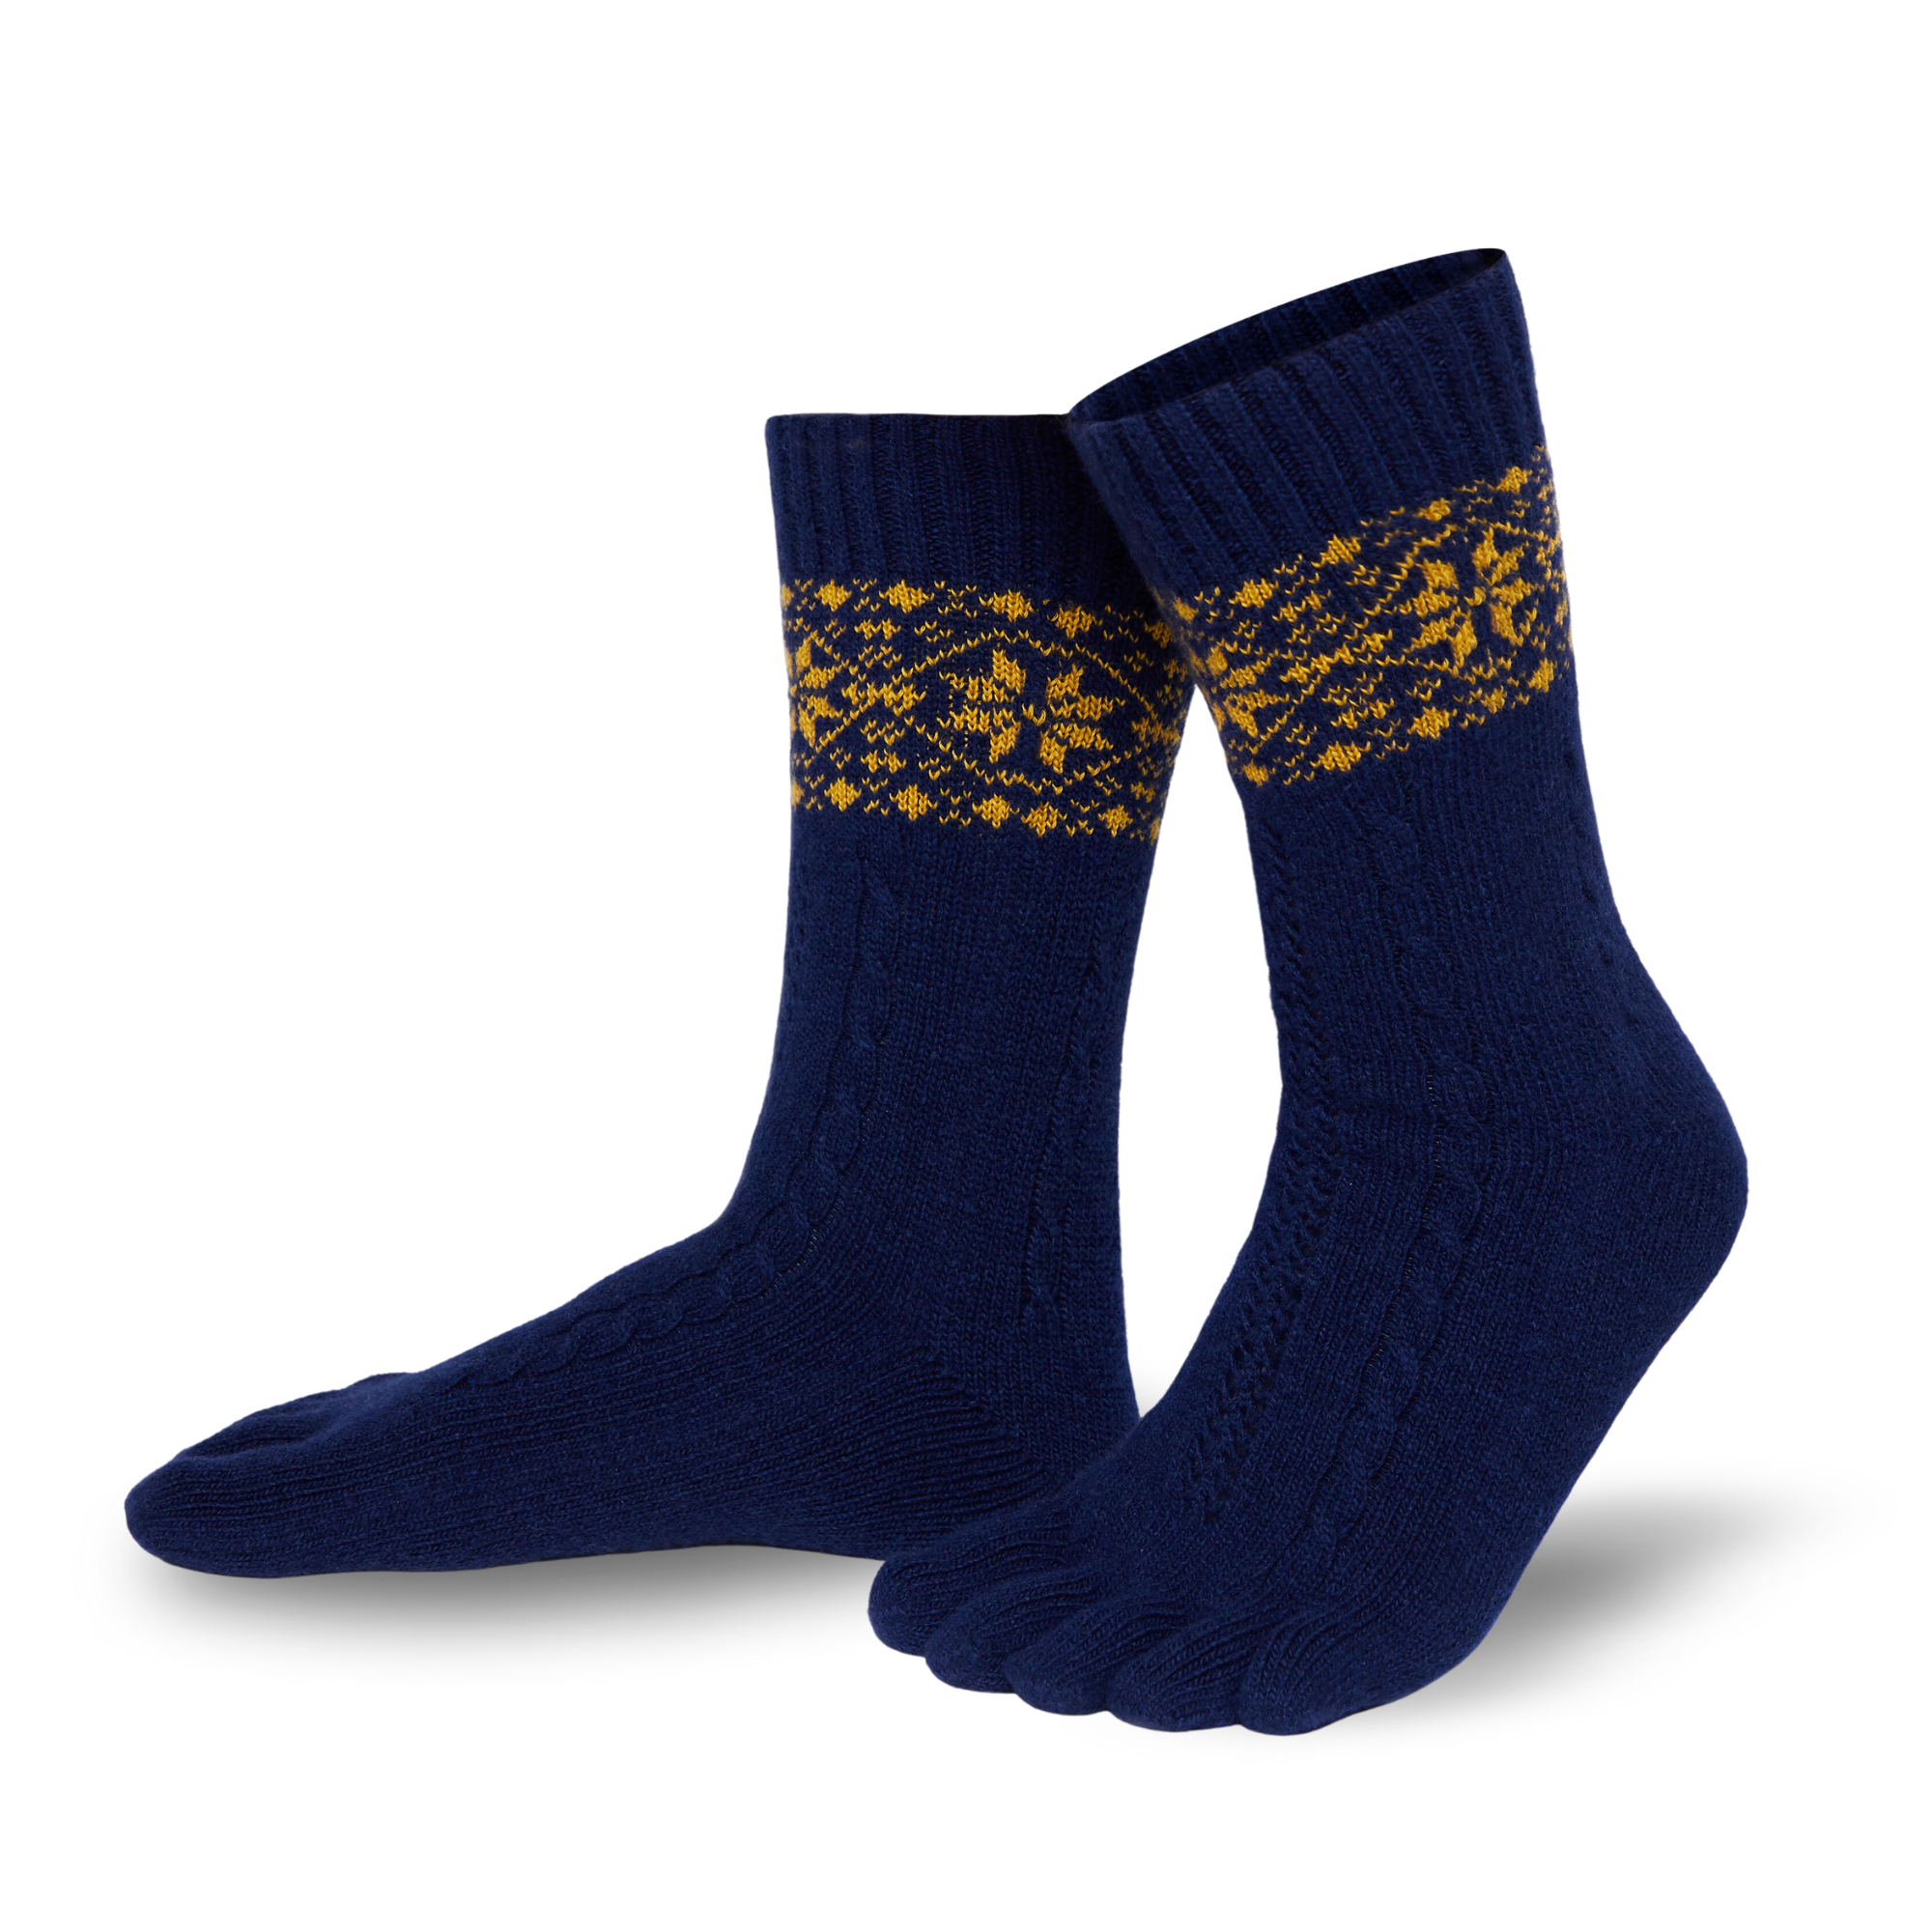 Knitido warm merino & cashmere toe socks with snow patches pattern in navy/gold